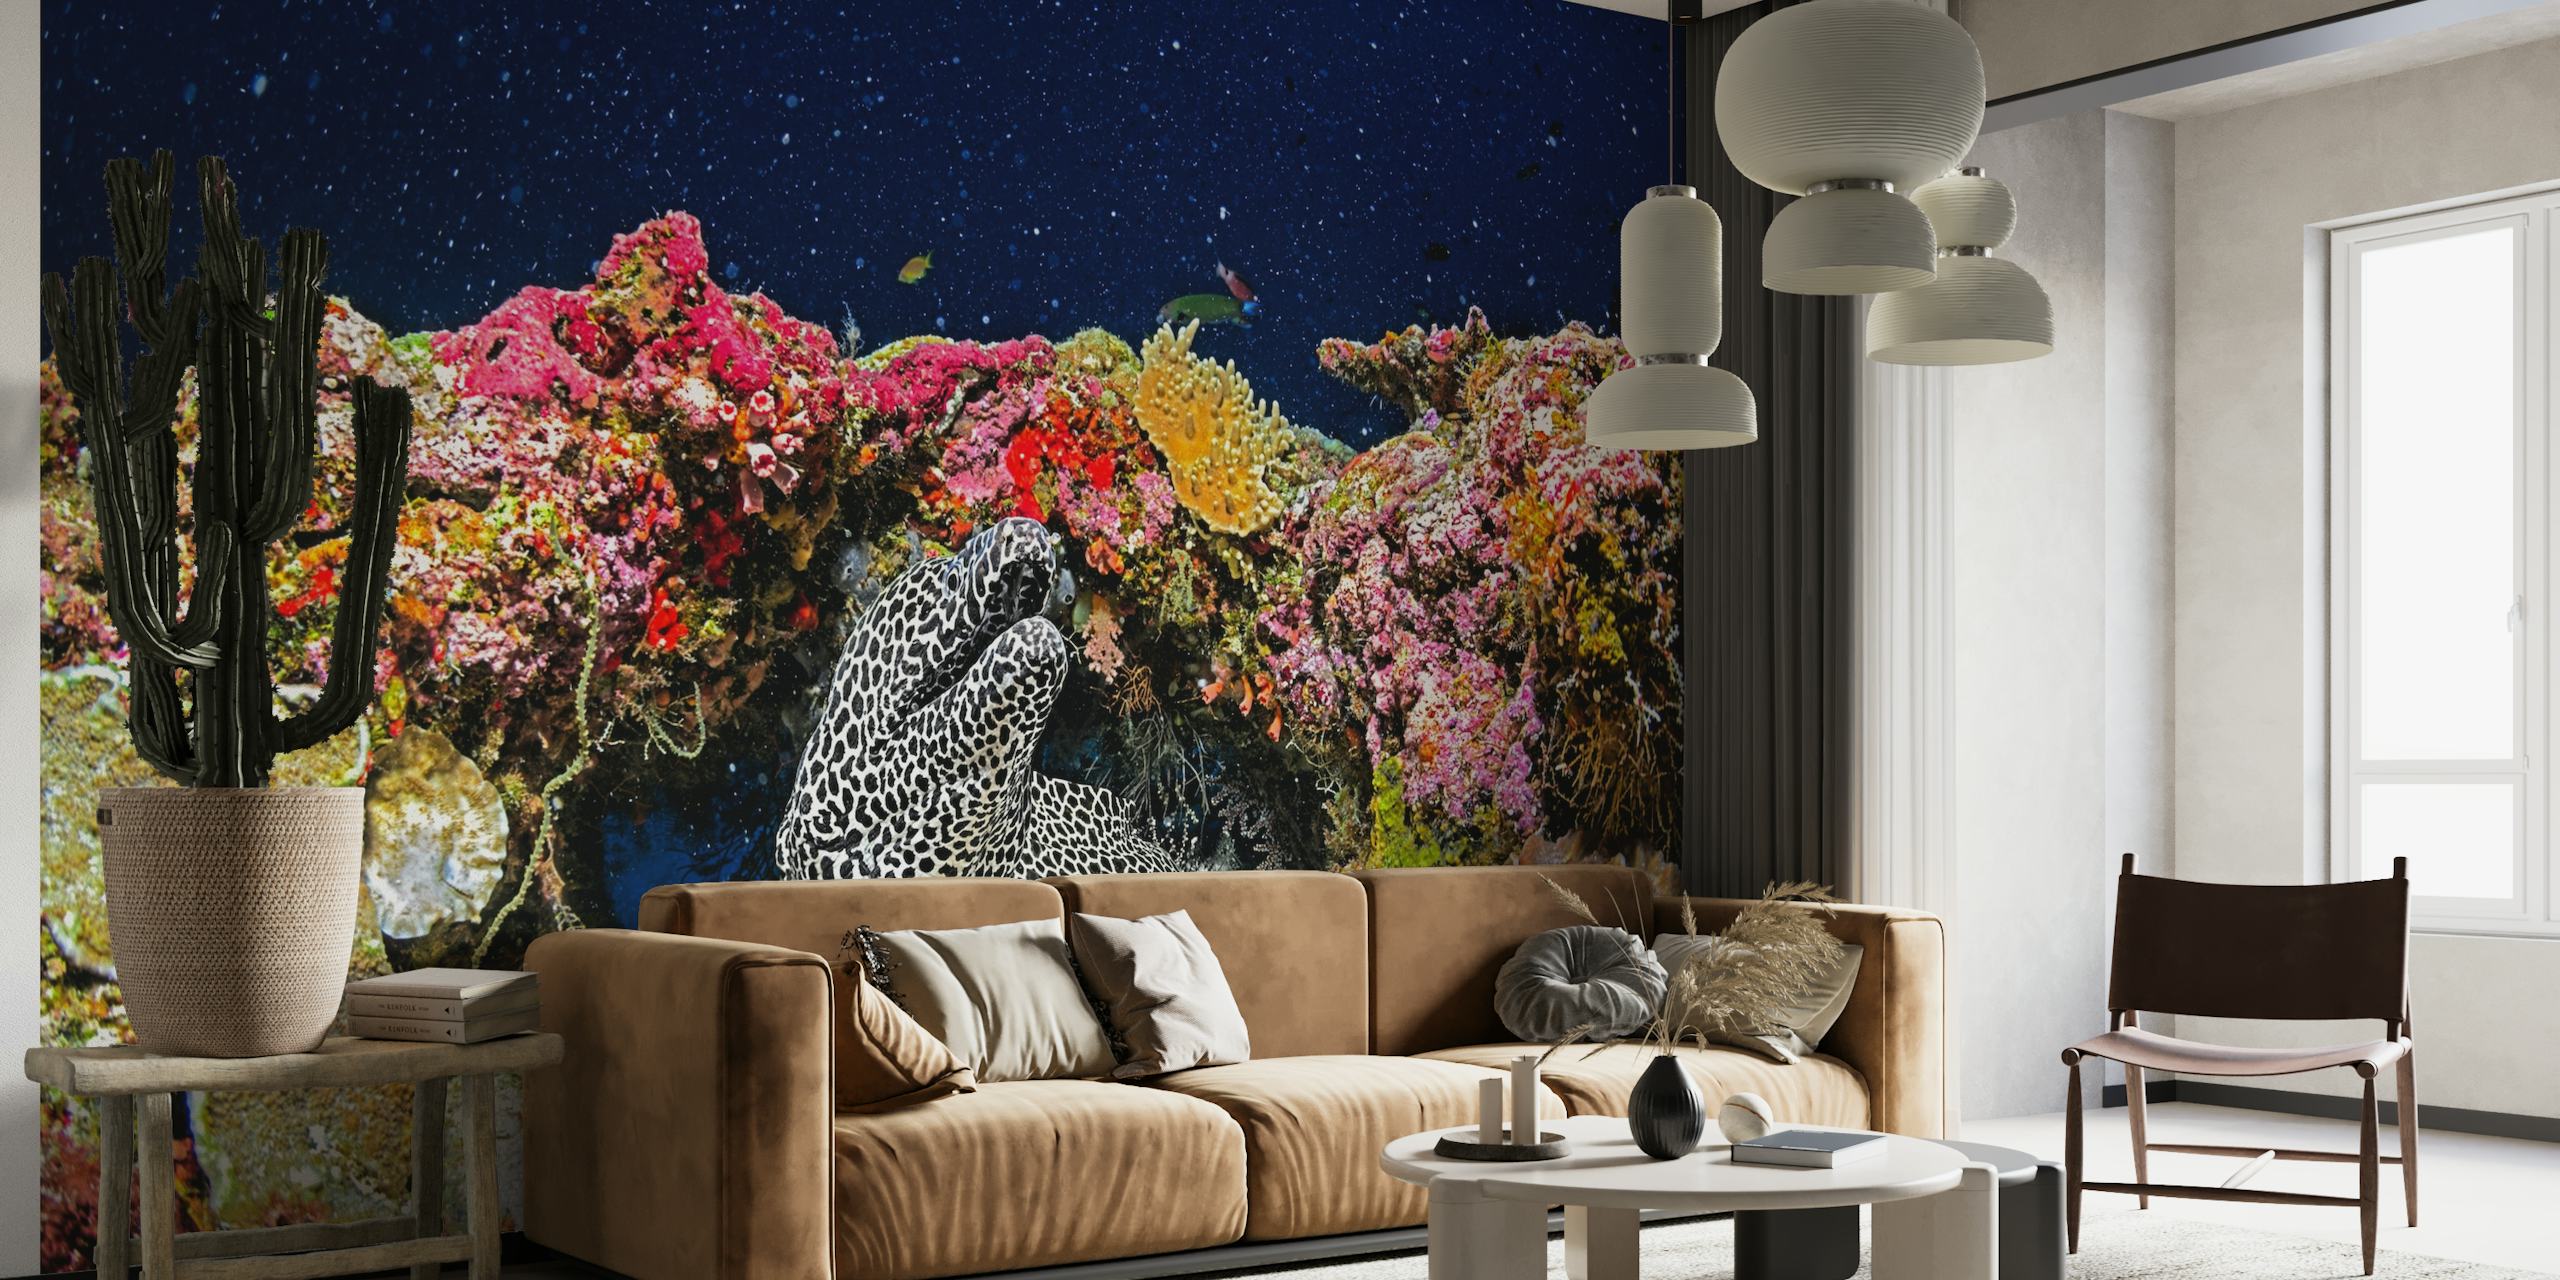 Under the Star wall mural featuring a moray eel and coral reef.